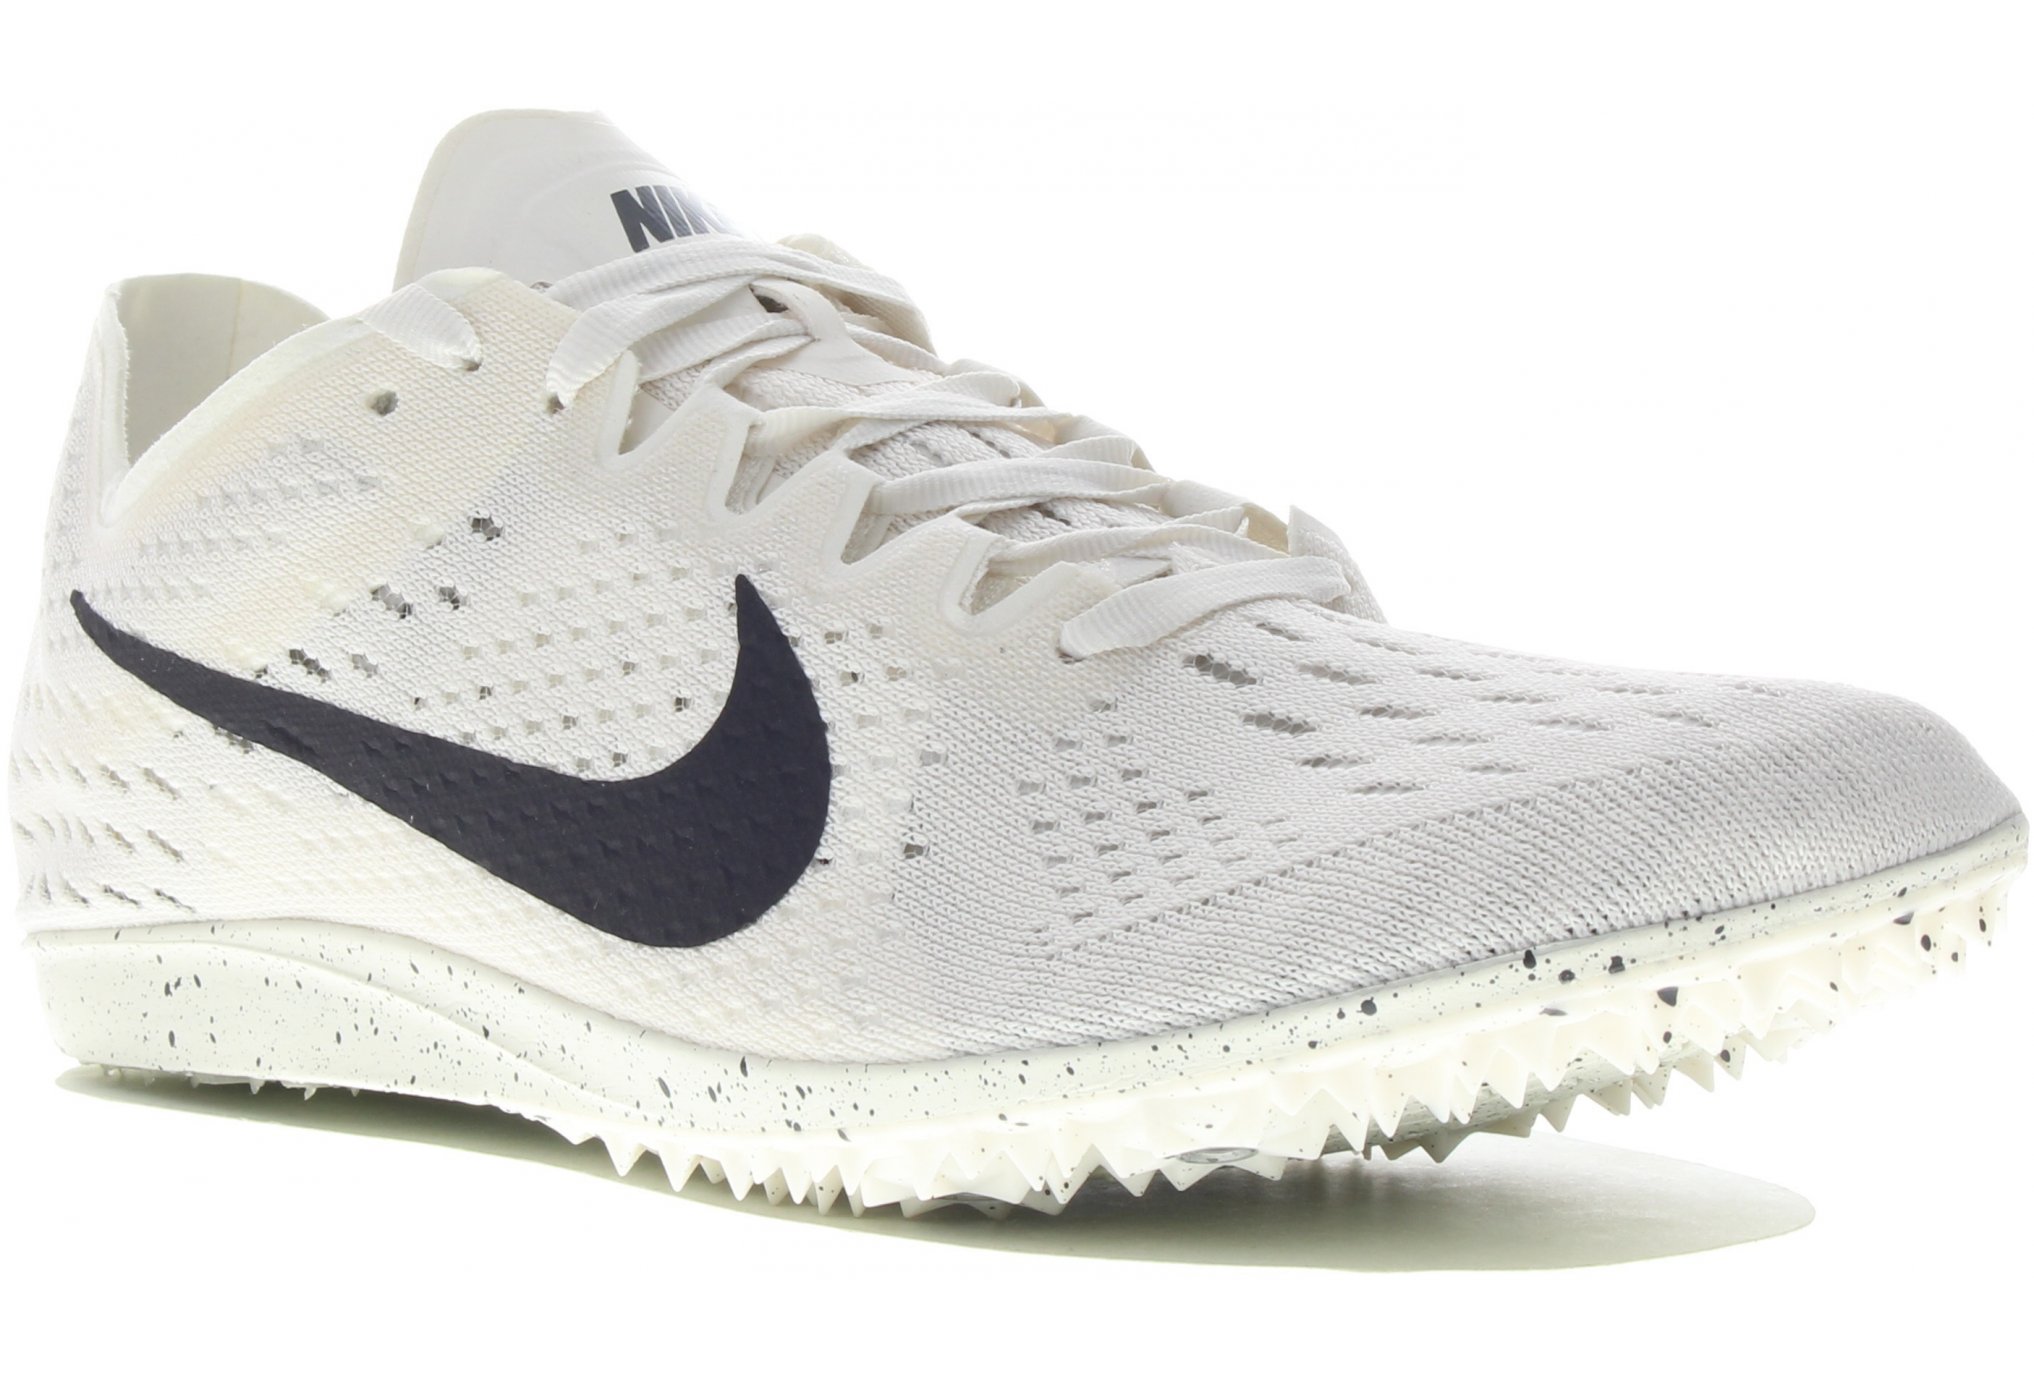 Nike Zoom matumbo 3 m dittique chaussures homme